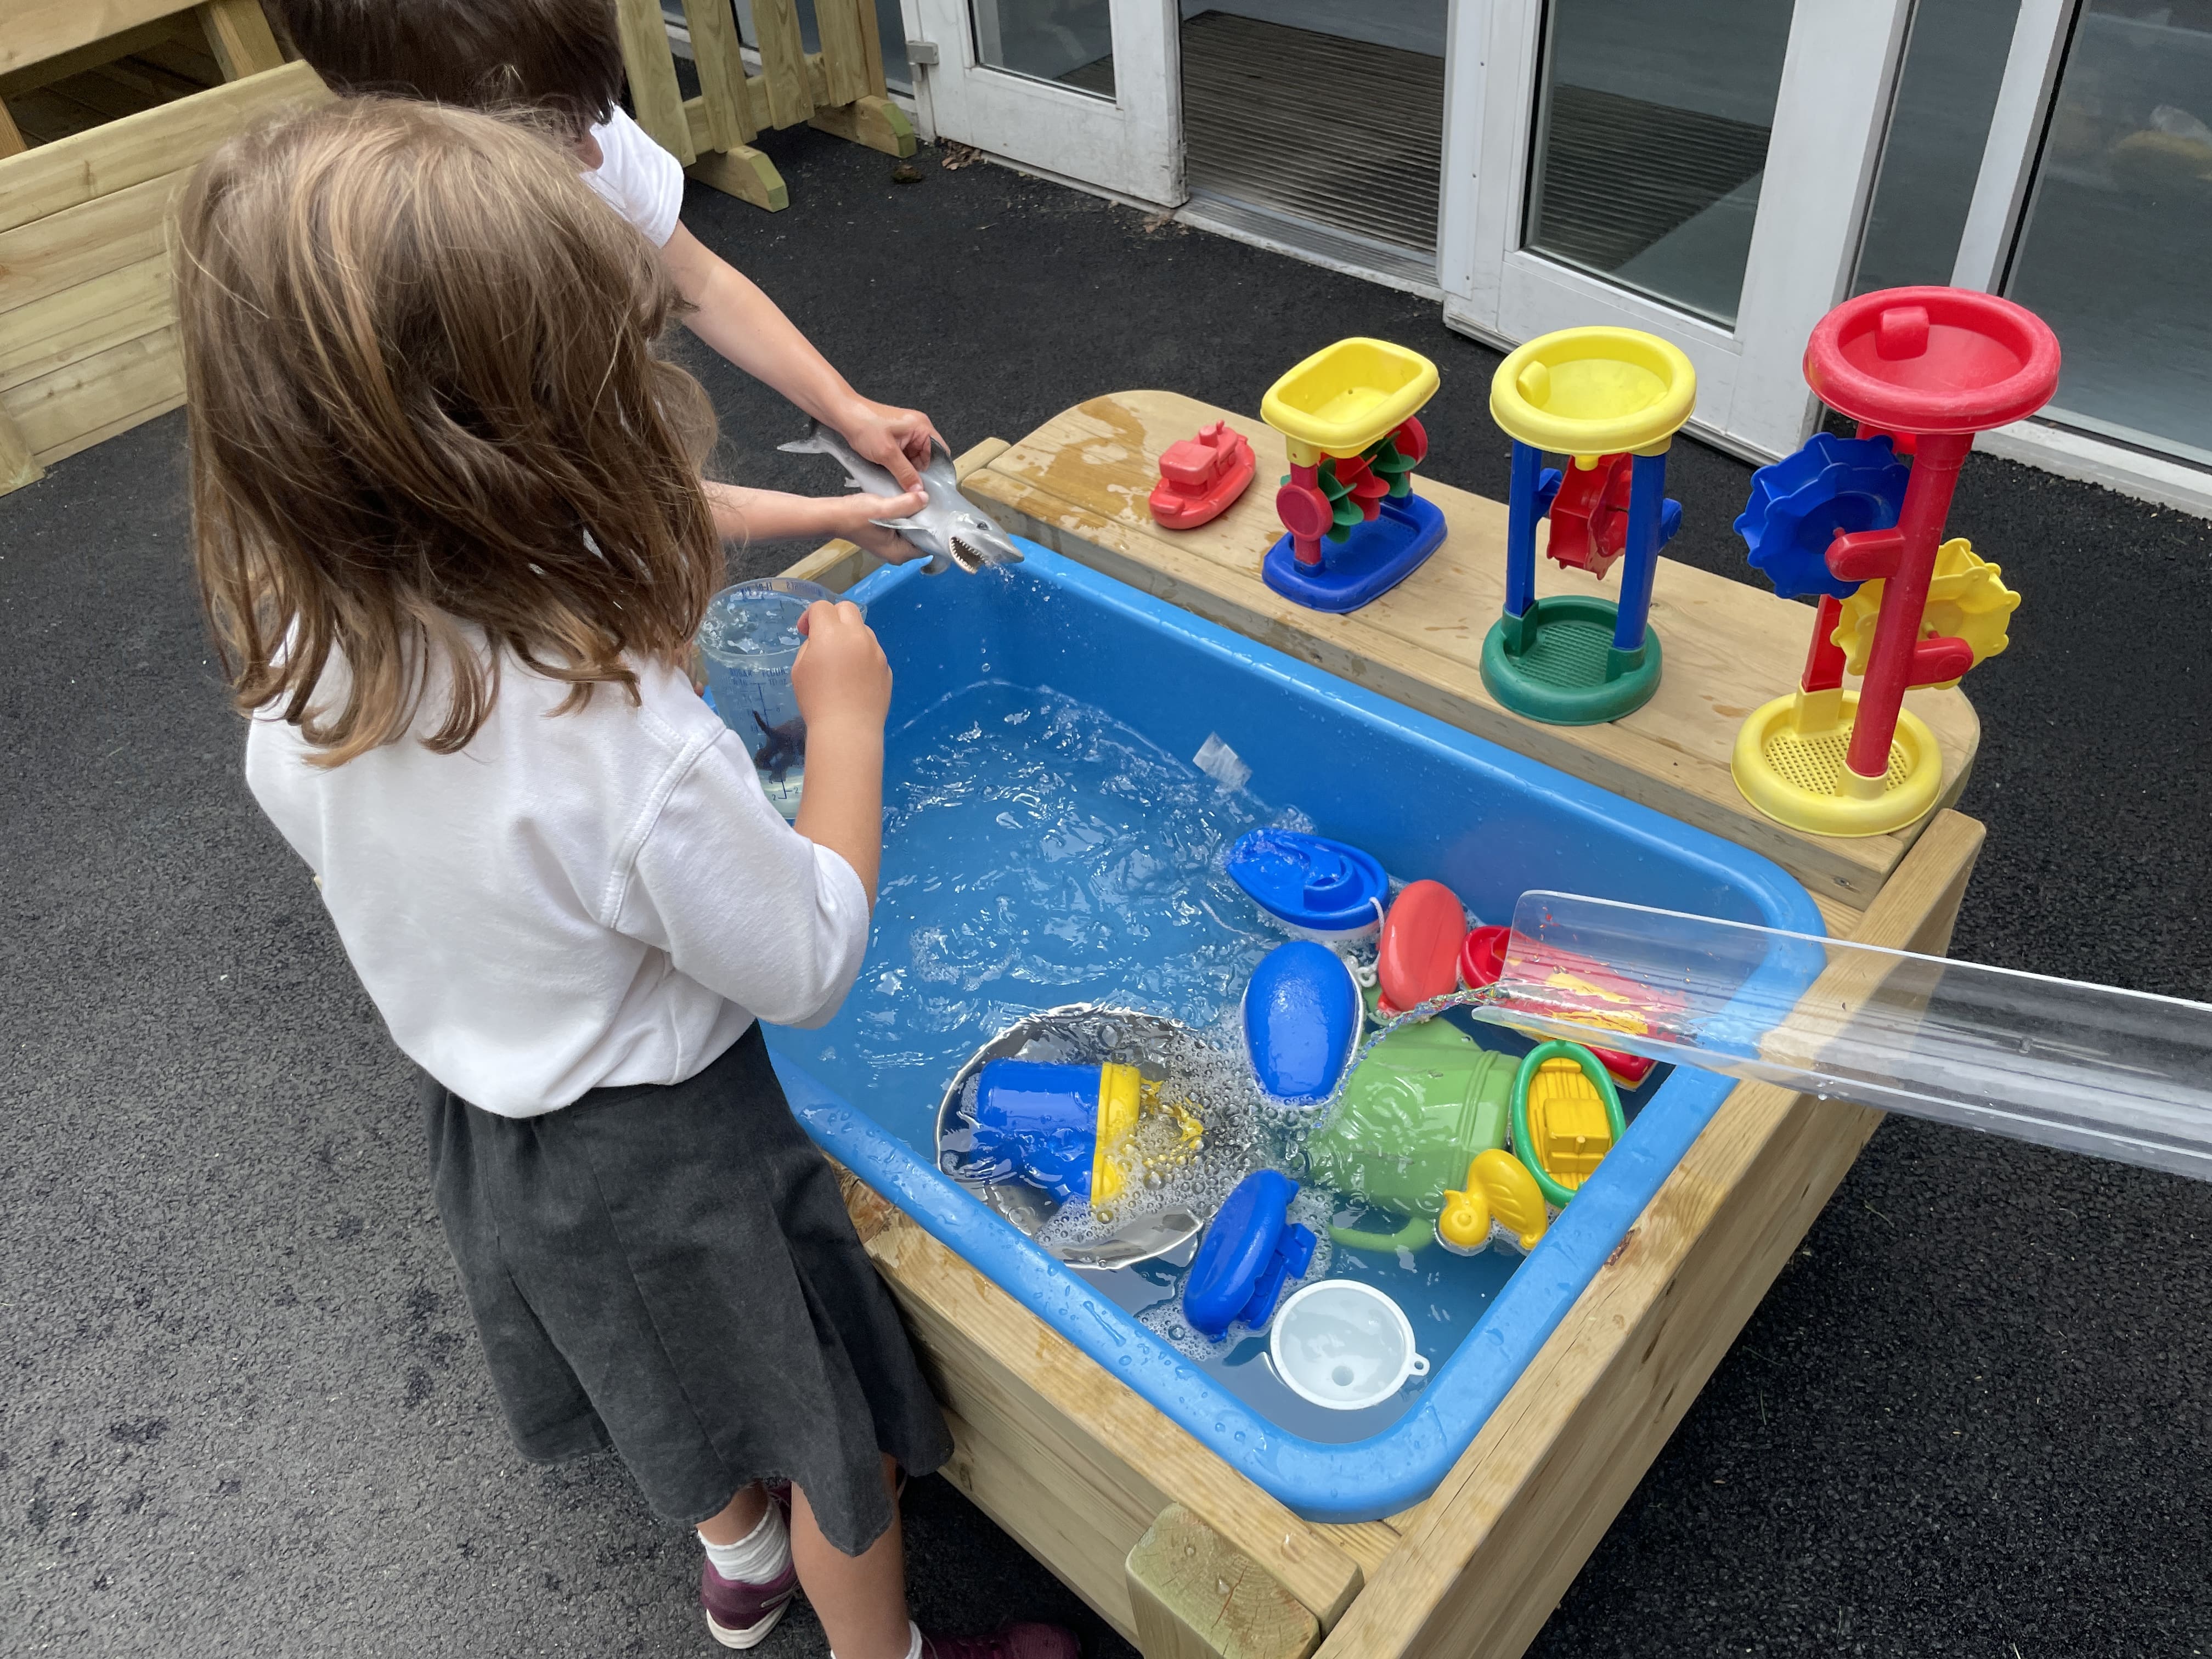 A girl and a boy are playing with a water table, which is a wooden box, with a plastic inside covering full of water. A wide variety of different water toys are placed around the area.